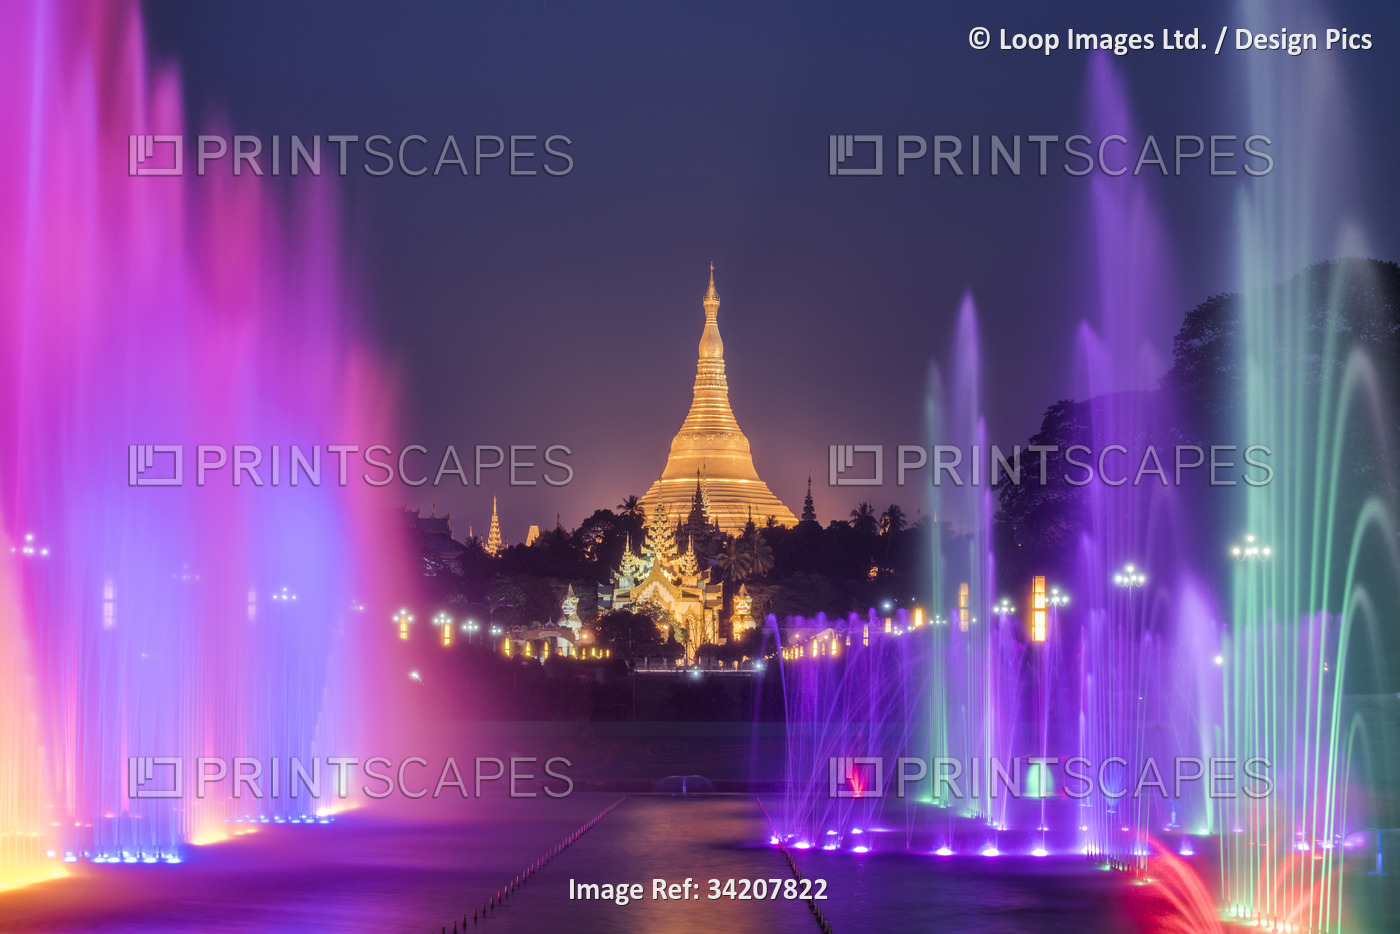 Public Square with lit water fountains and Shwedagon Pagoda at night in Yangon.